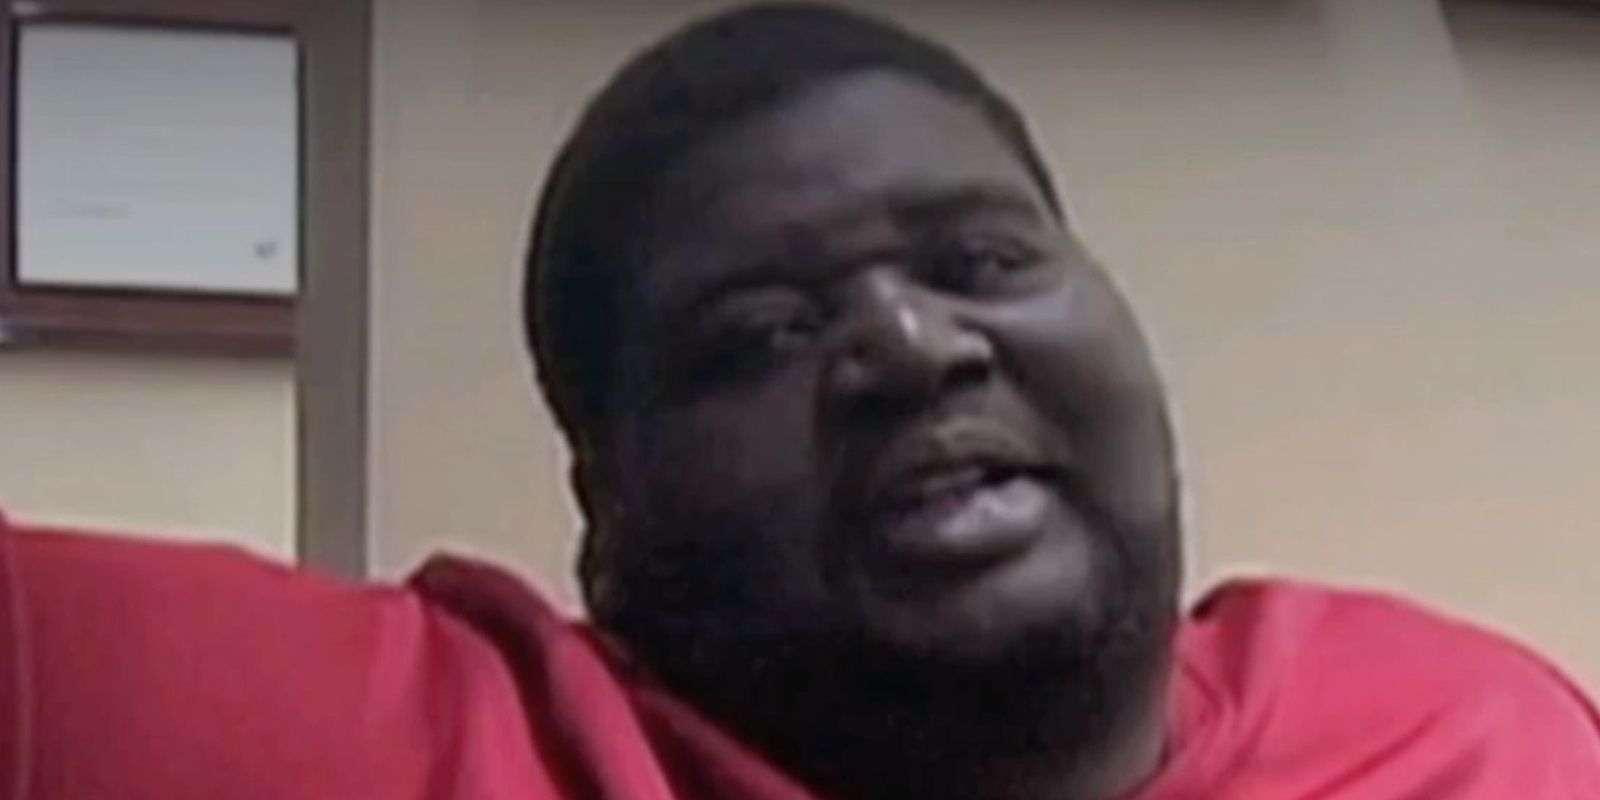 Dr. Nowzaradan death hoax? My 600-lb Life doctor lets fans know he